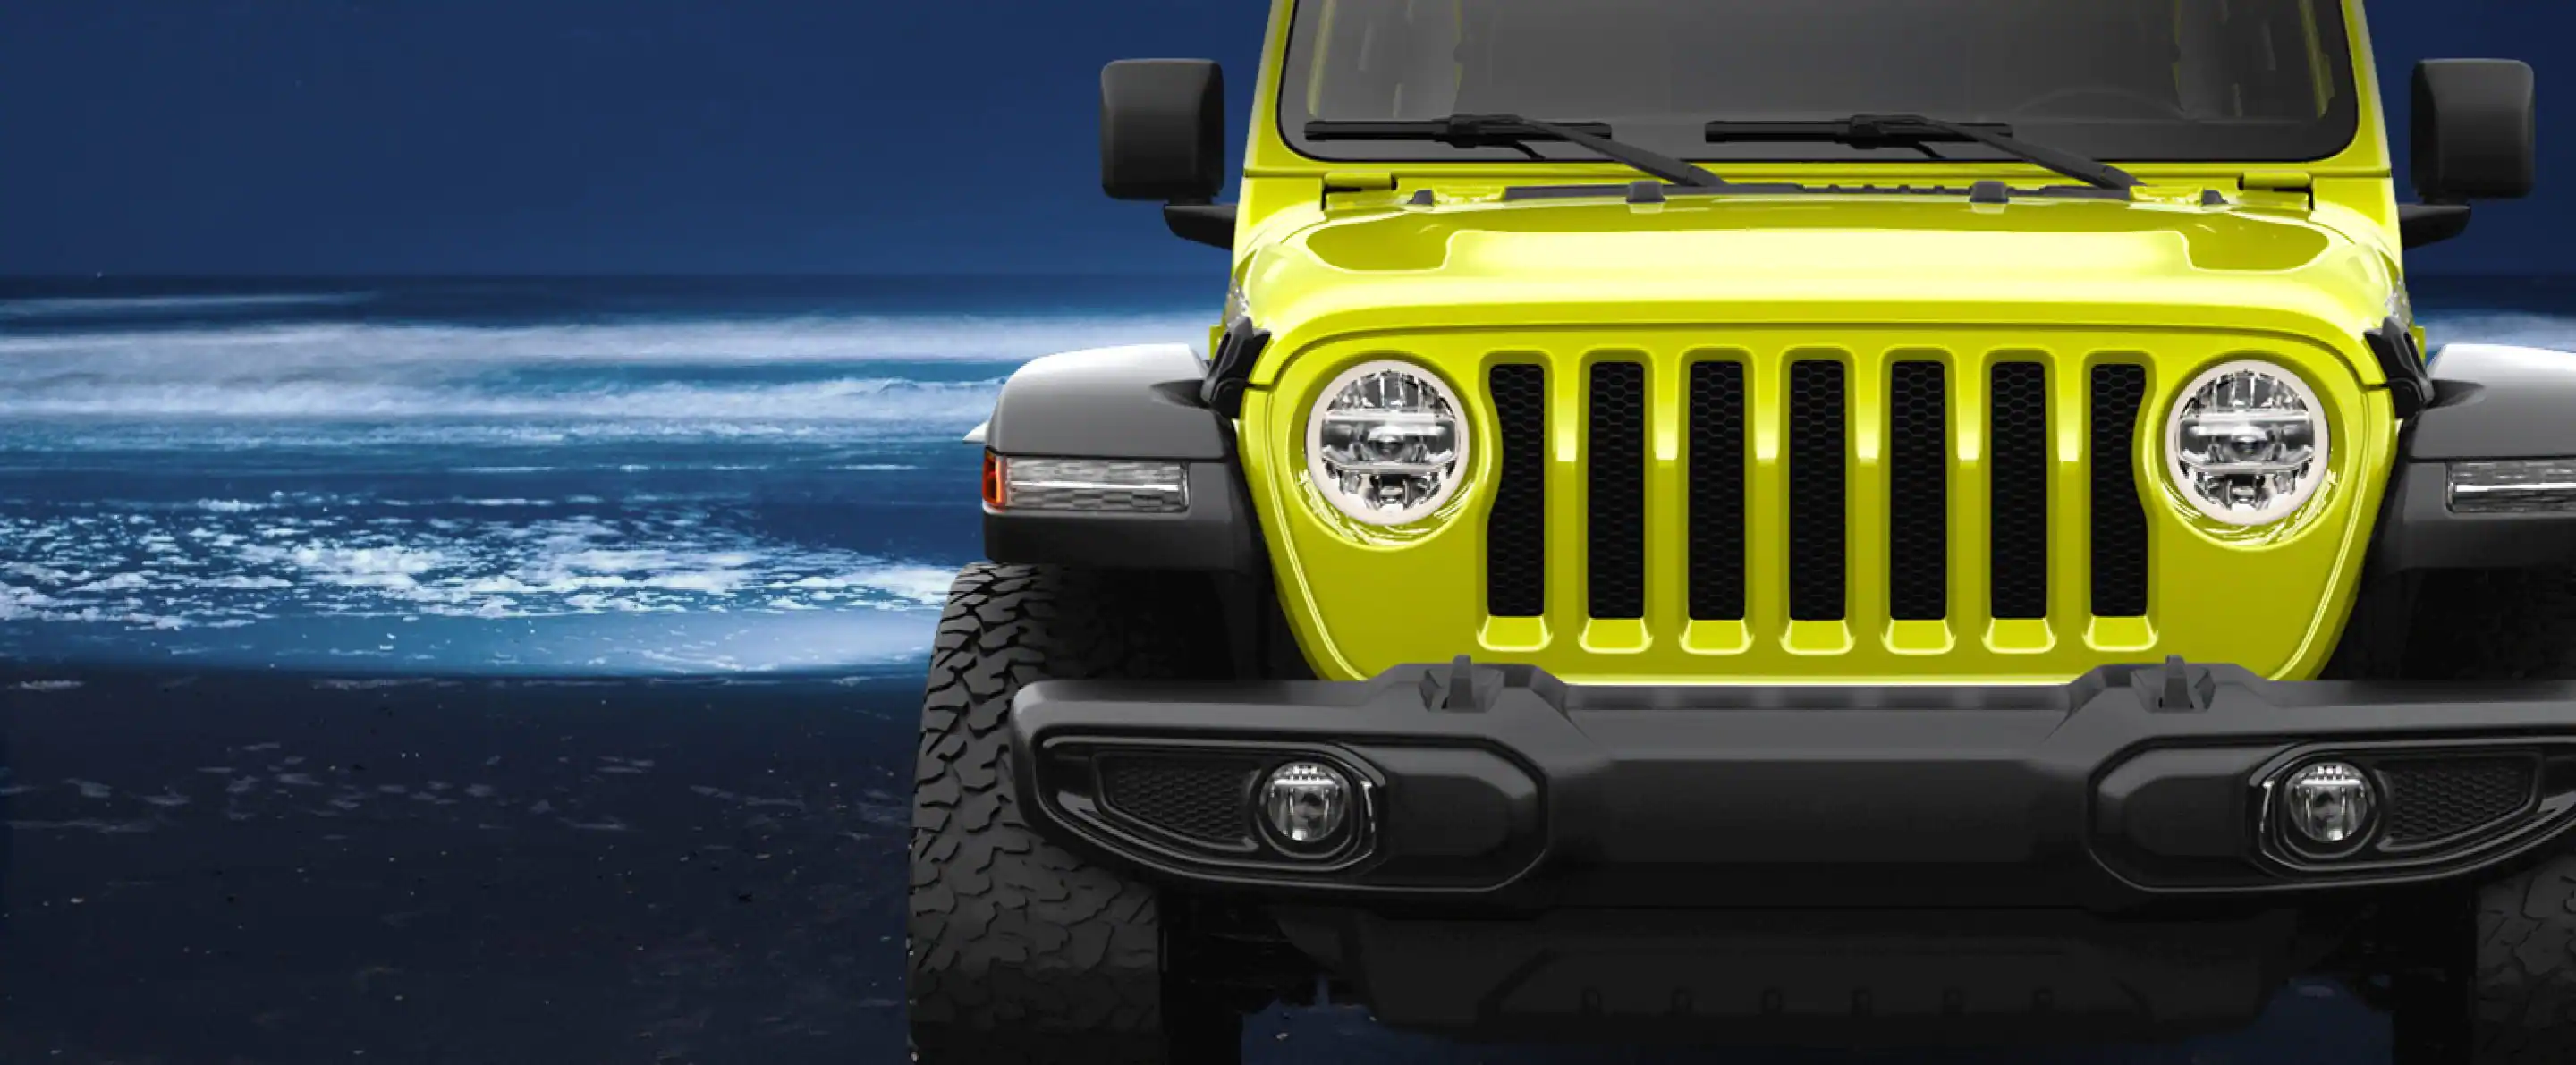 Jeep Wrangler High Tide Limited Edition